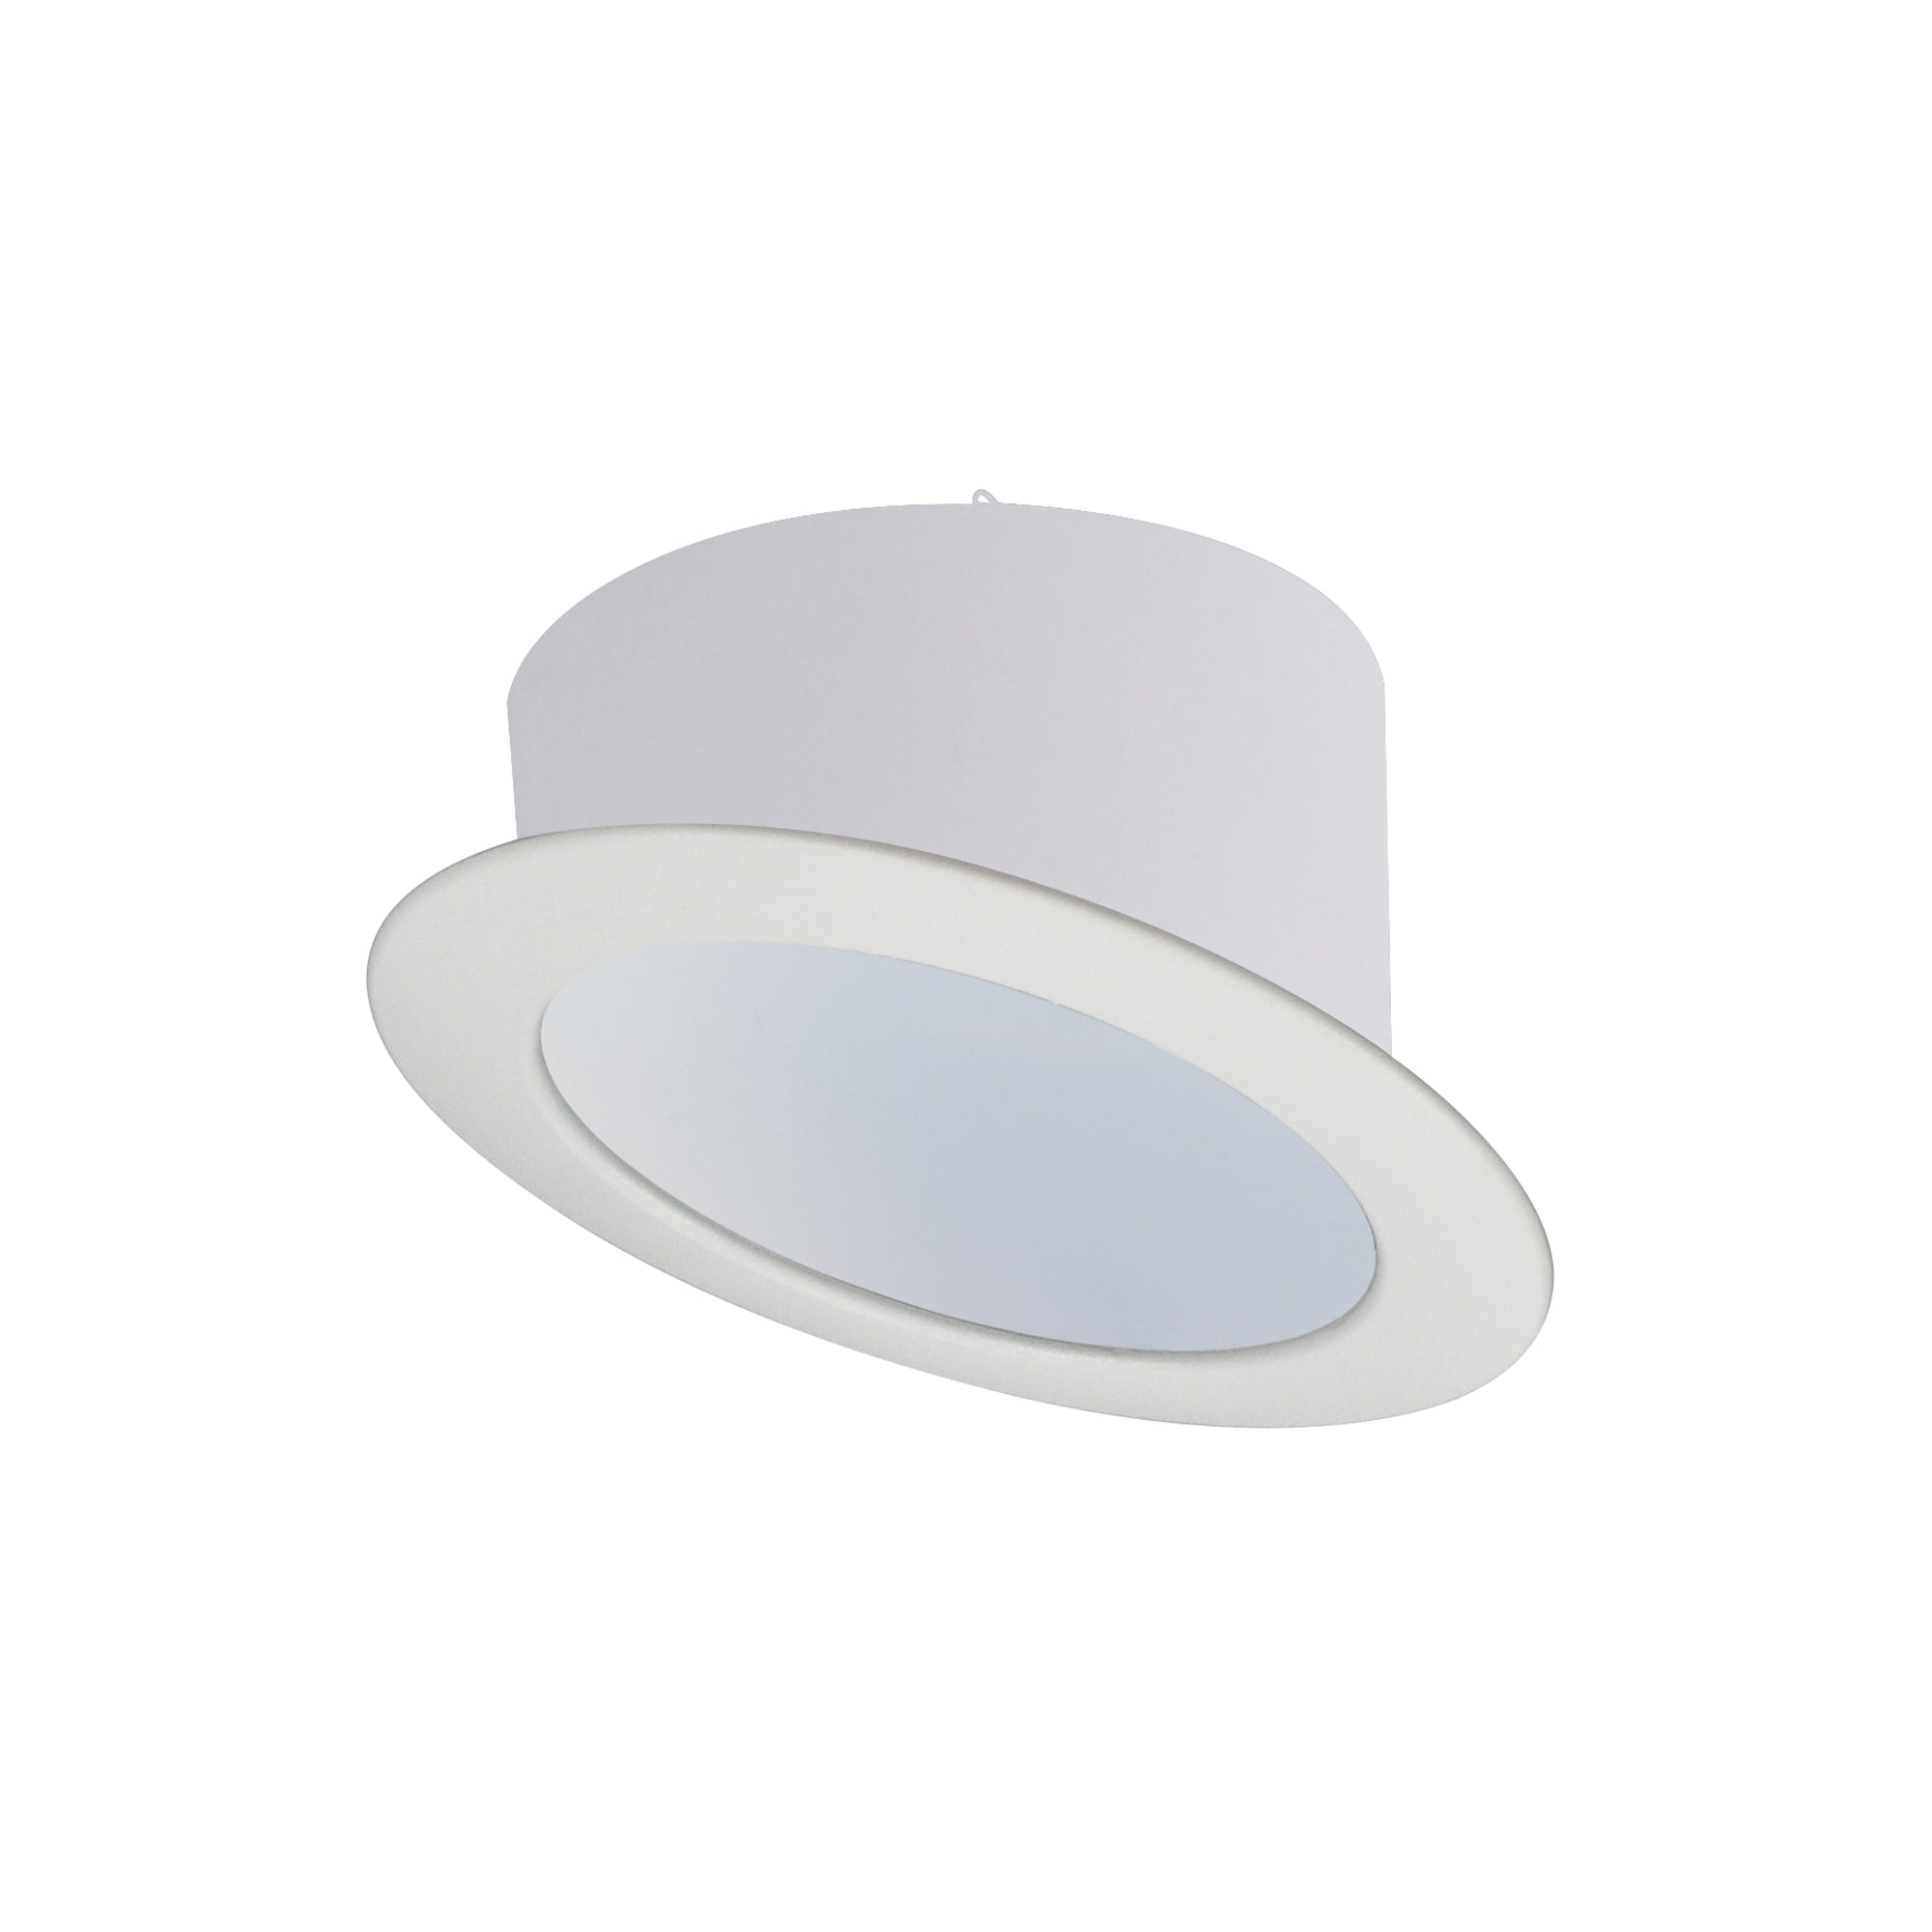 Nora Lighting NTS-615/45W - Recessed - 6 Inch Super-Sloped 45-Deg. Metal Reflector Trim for 926 Housings Only, White/White